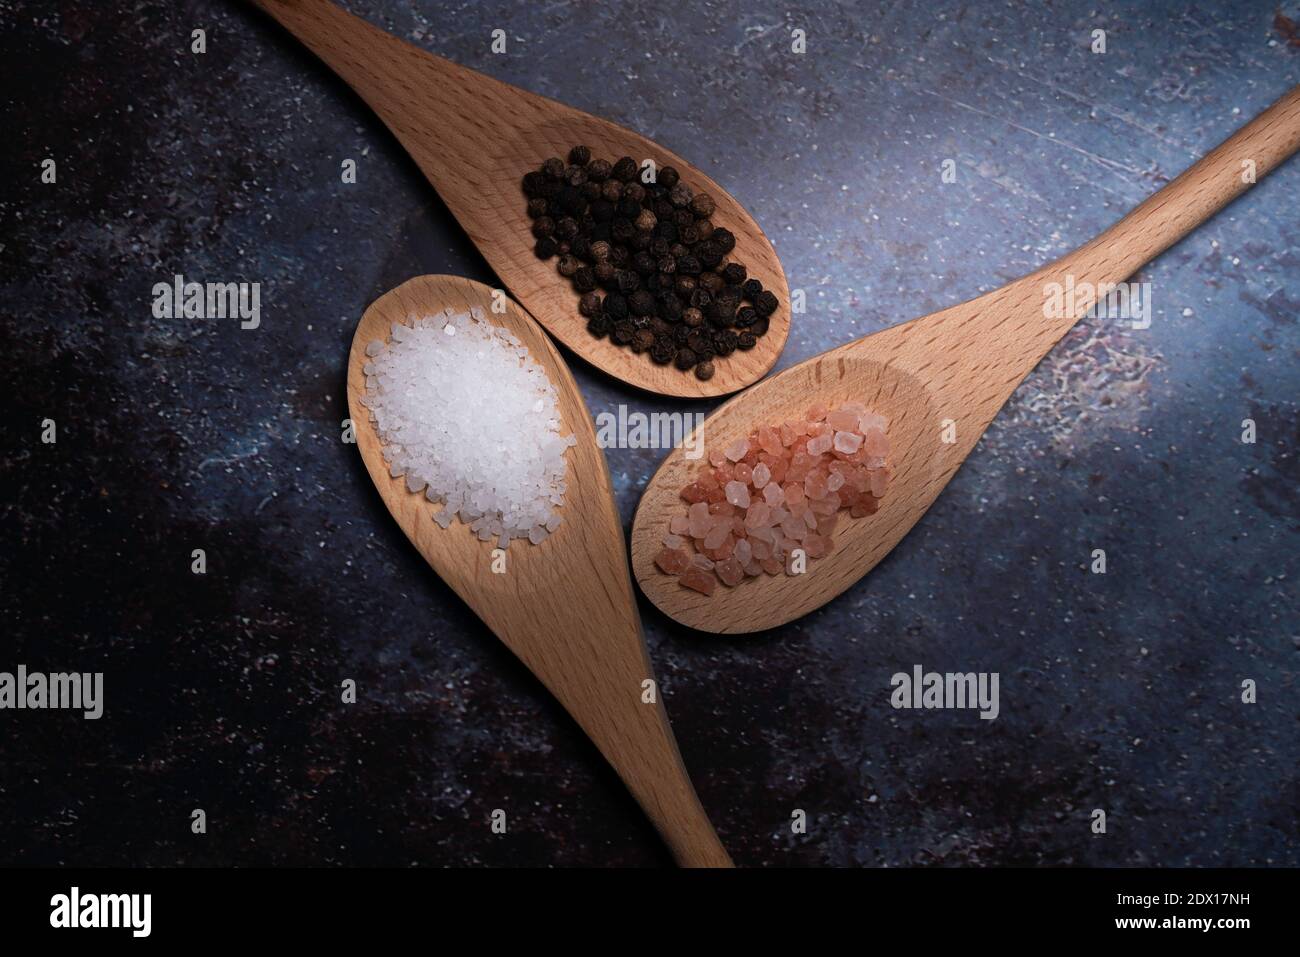 Directional Lighting on three wooden spoons with black peppercorns, White Kosher Salt, and Pink Sea Salt Stock Photo